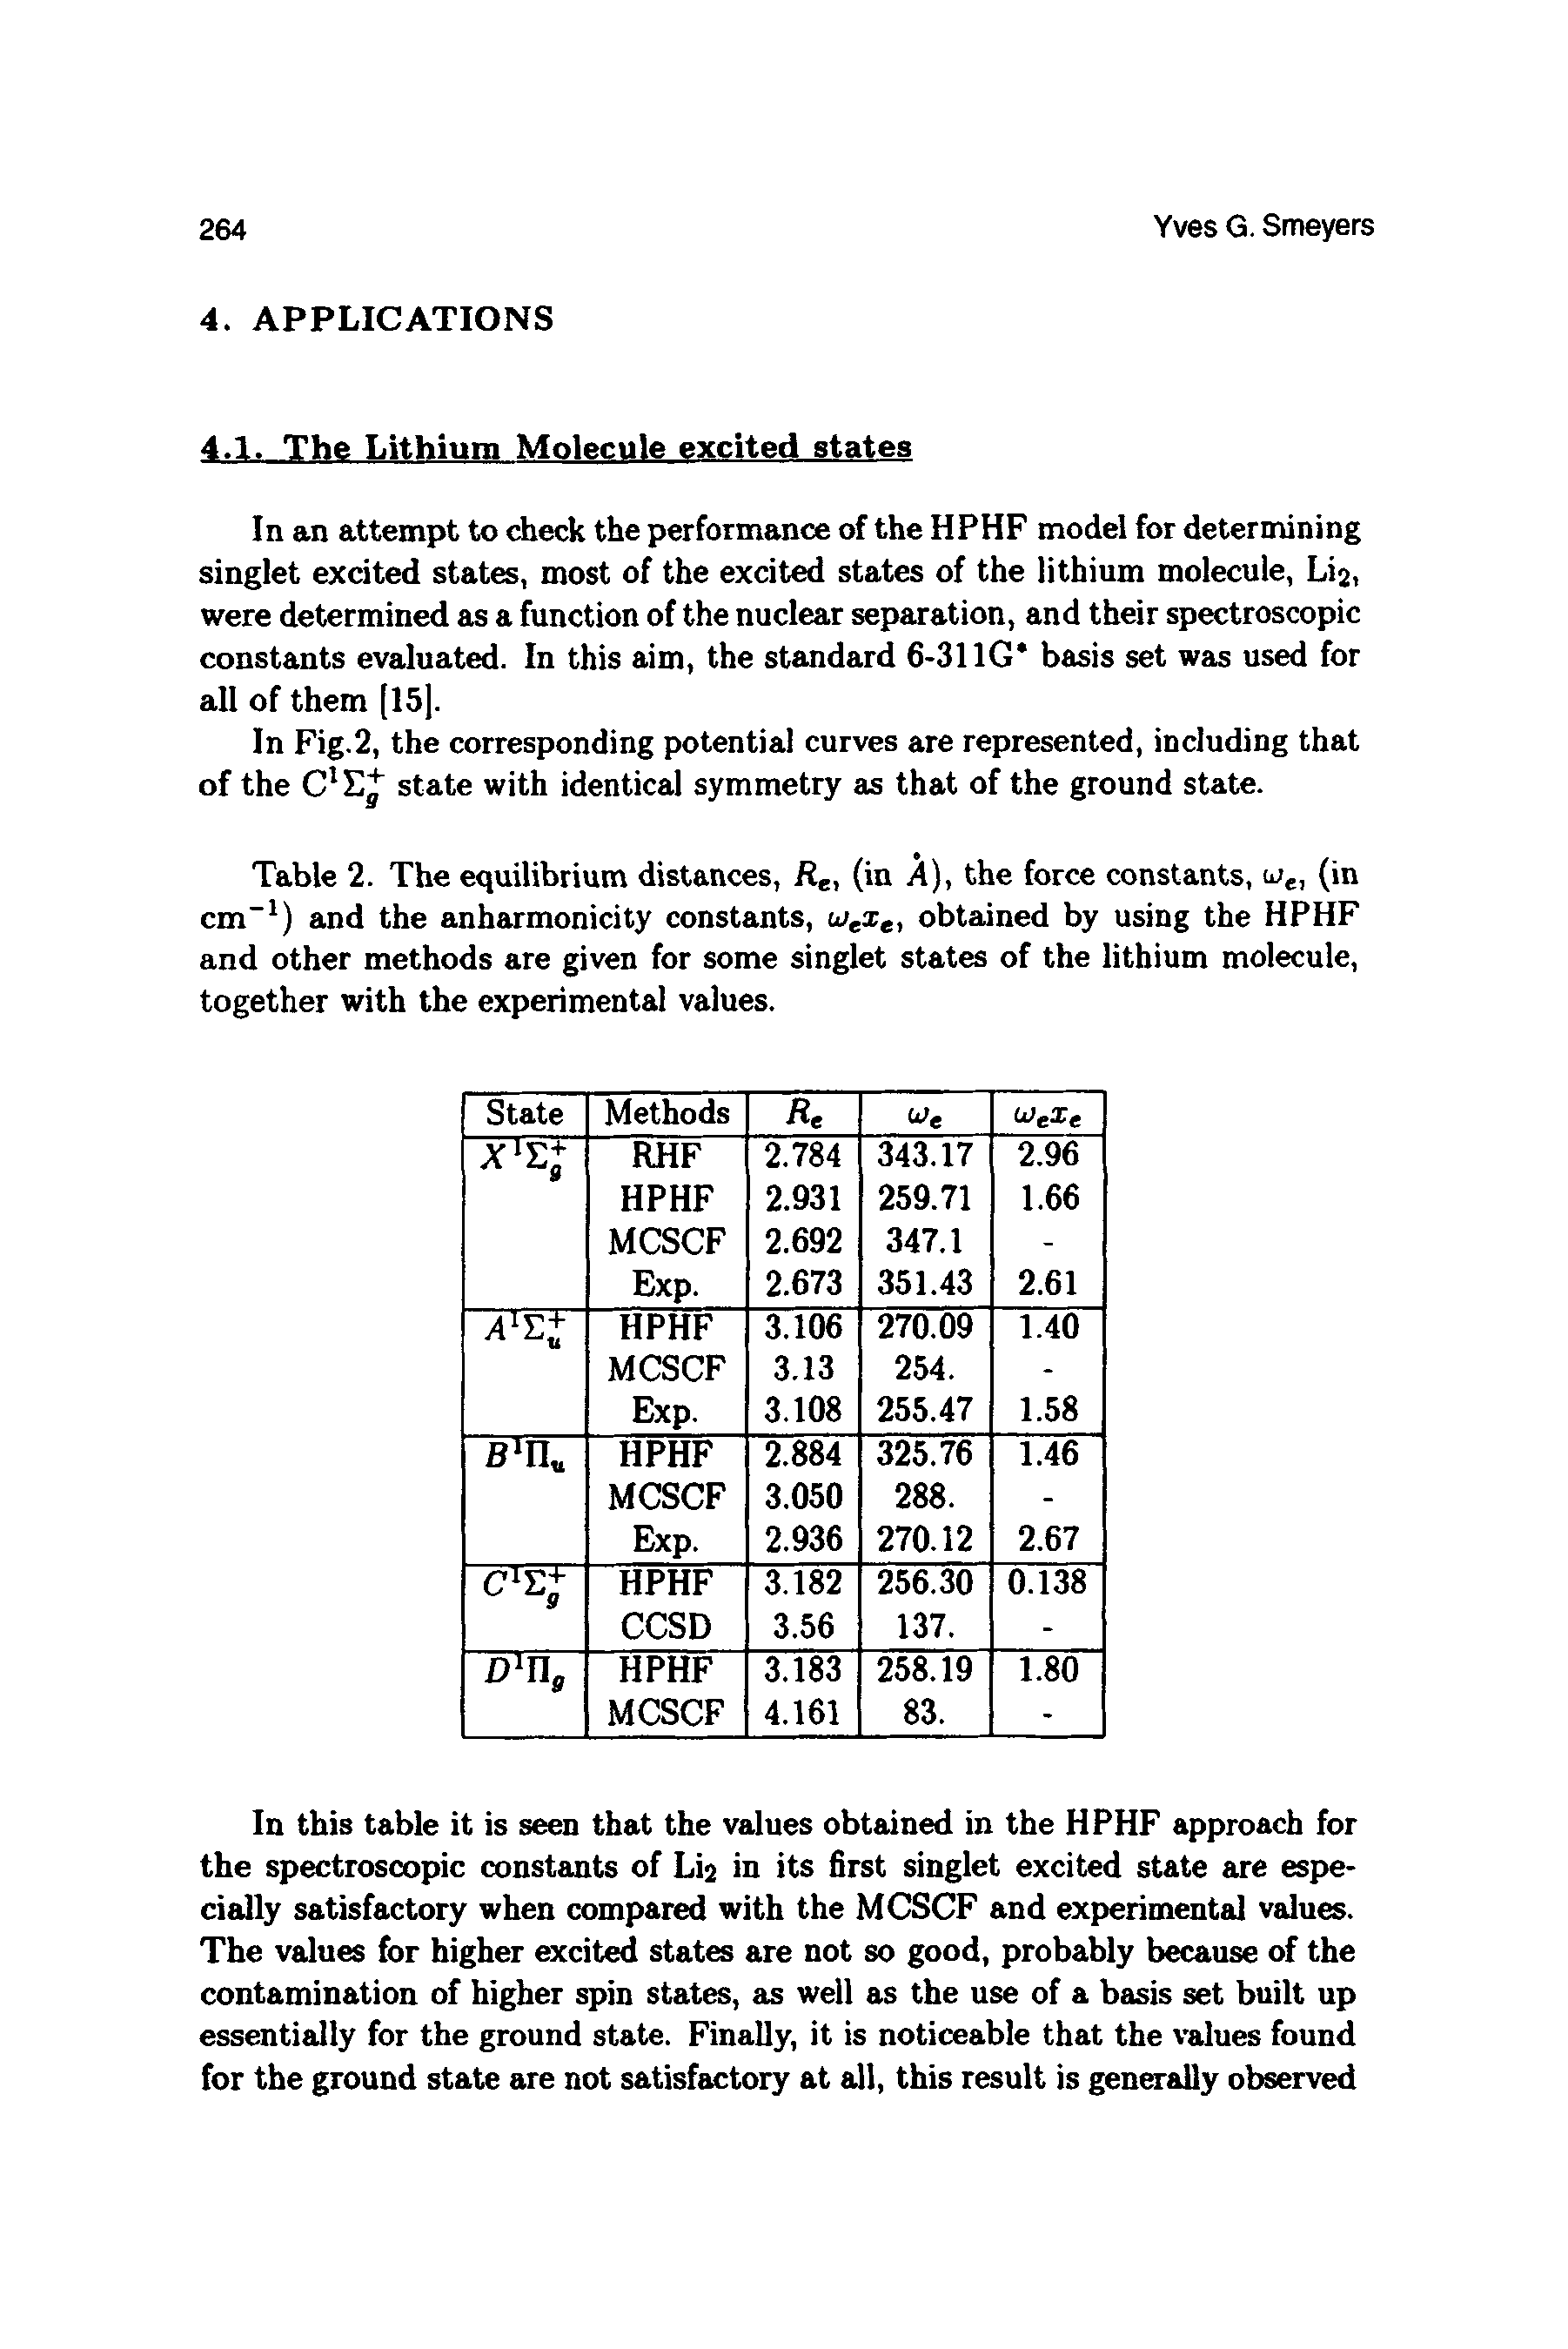 Table 2. The equilibrium distances, Re, (in A), the force constants, Wei (>n cm ) and the anharmonicity constants, uigXe, obtained by using the HPHF and other methods are given for some singlet states of the lithium molecule, together with the experimental values.